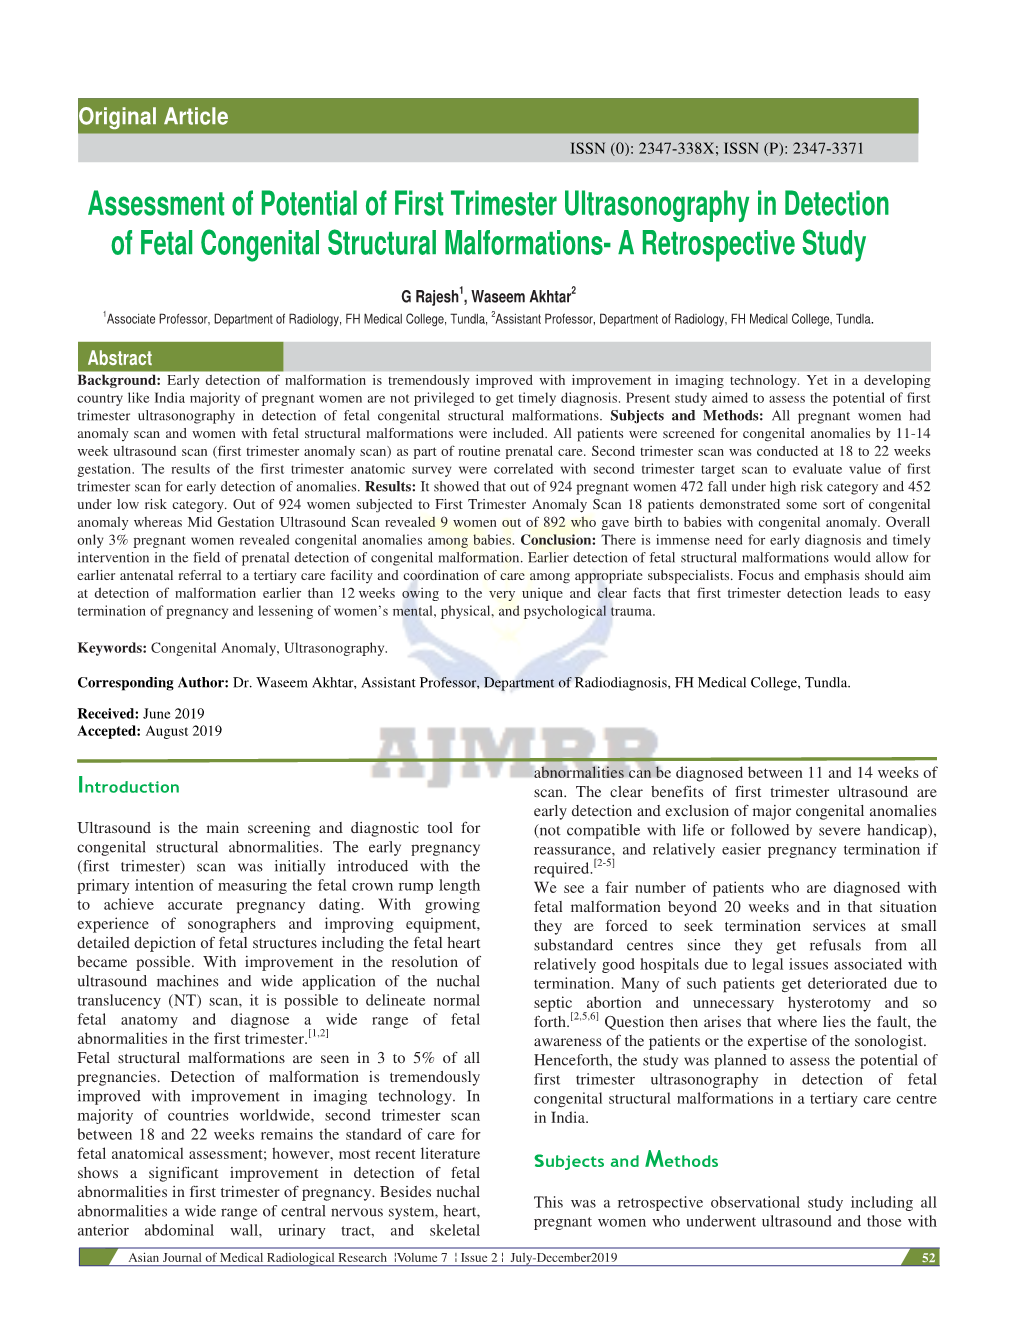 Assessment of Potential of First Trimester Ultrasonography in Detection of Fetal Congenital Structural Malformations- a Retrospective Study